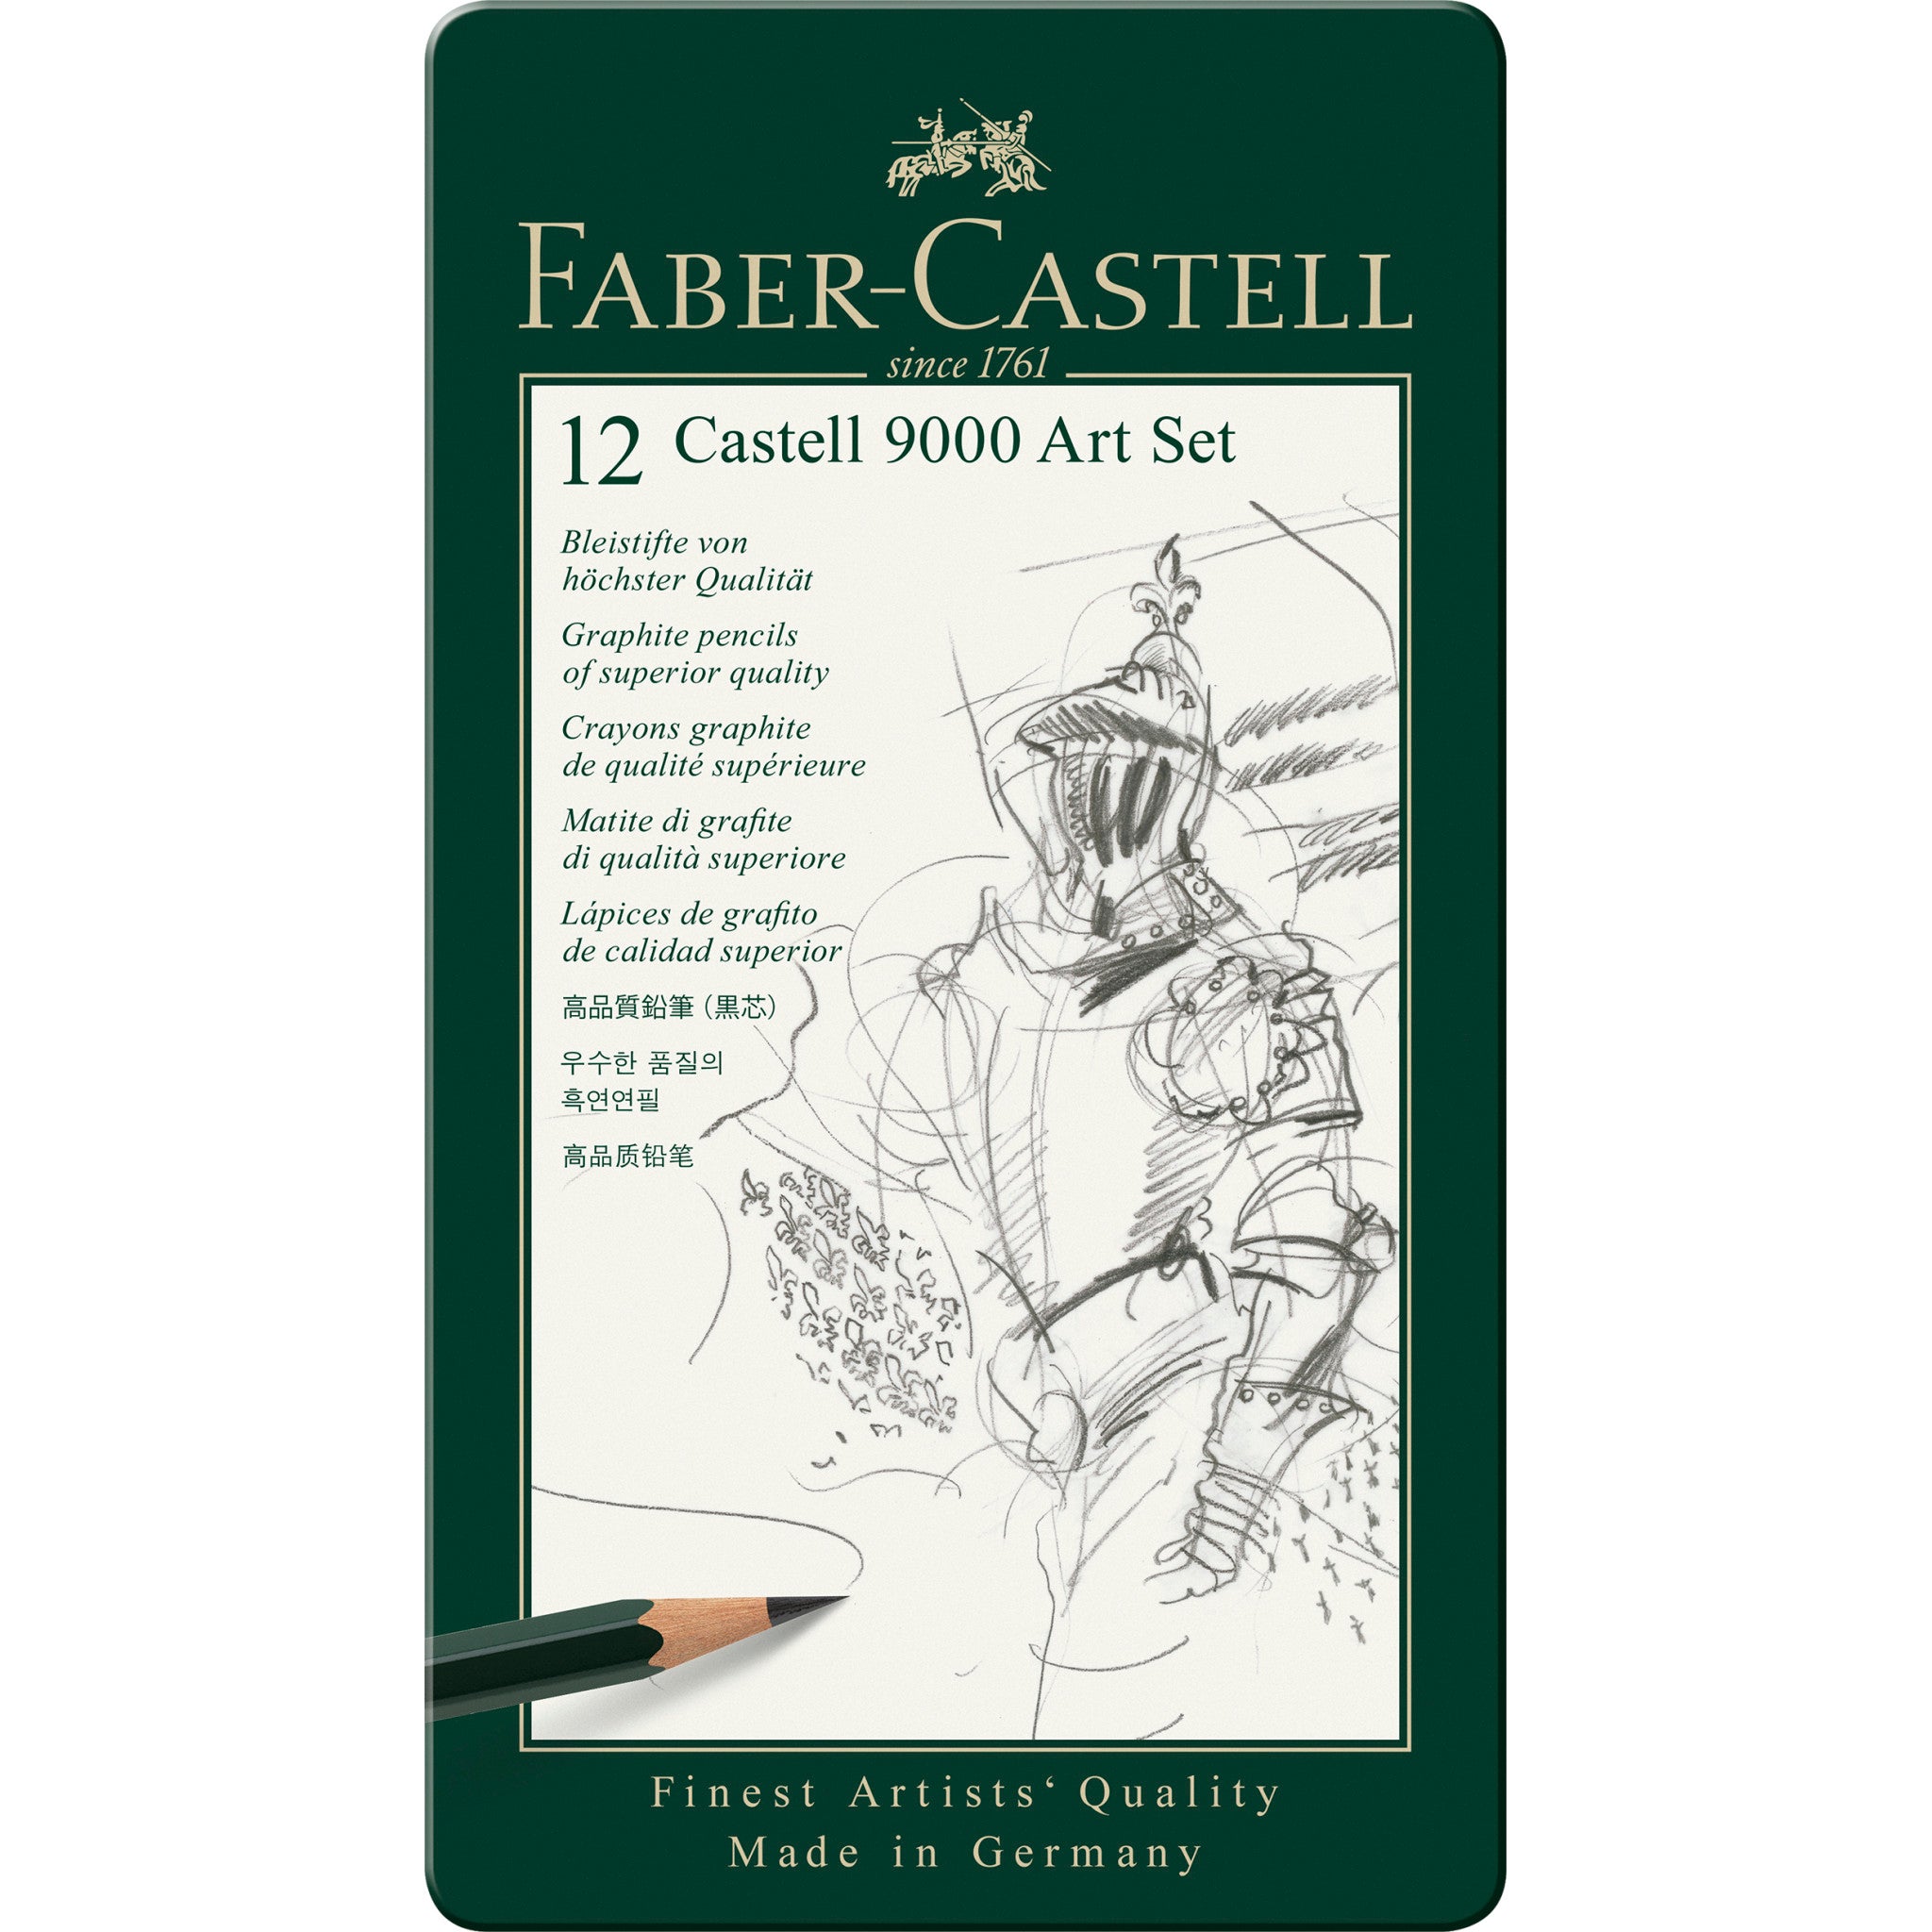 Faber-Castell pencils, Castell 9000 graphite pencils, 8B Pre-sharpened  Black lead pencils for sketch, shading, drawing, artist - box of 12 (8B)